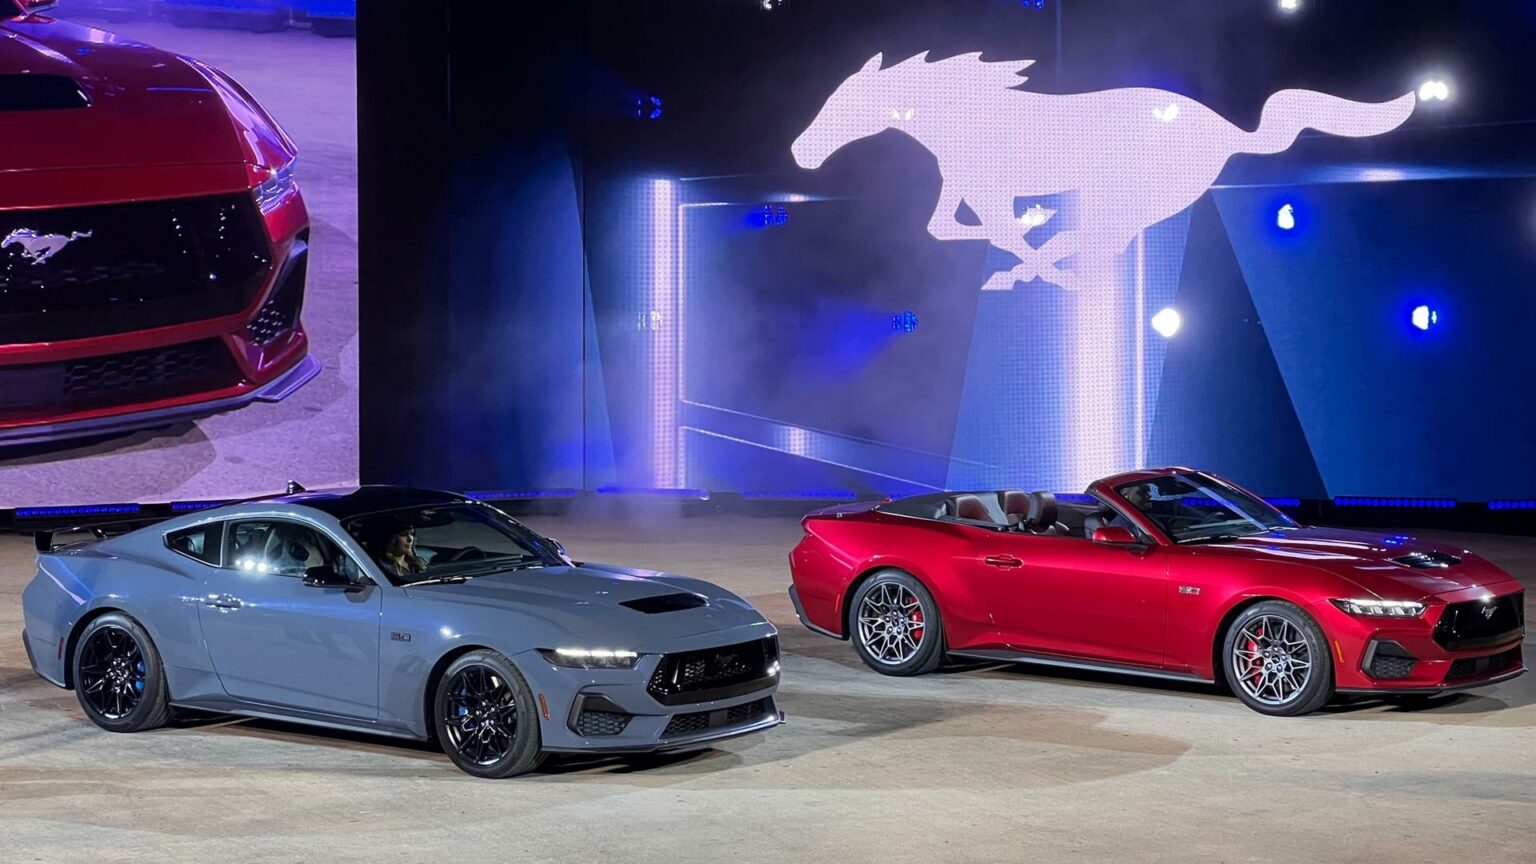 Gallery 2024 Ford Mustang Live at Detroit Auto Show 2022 GTspirit